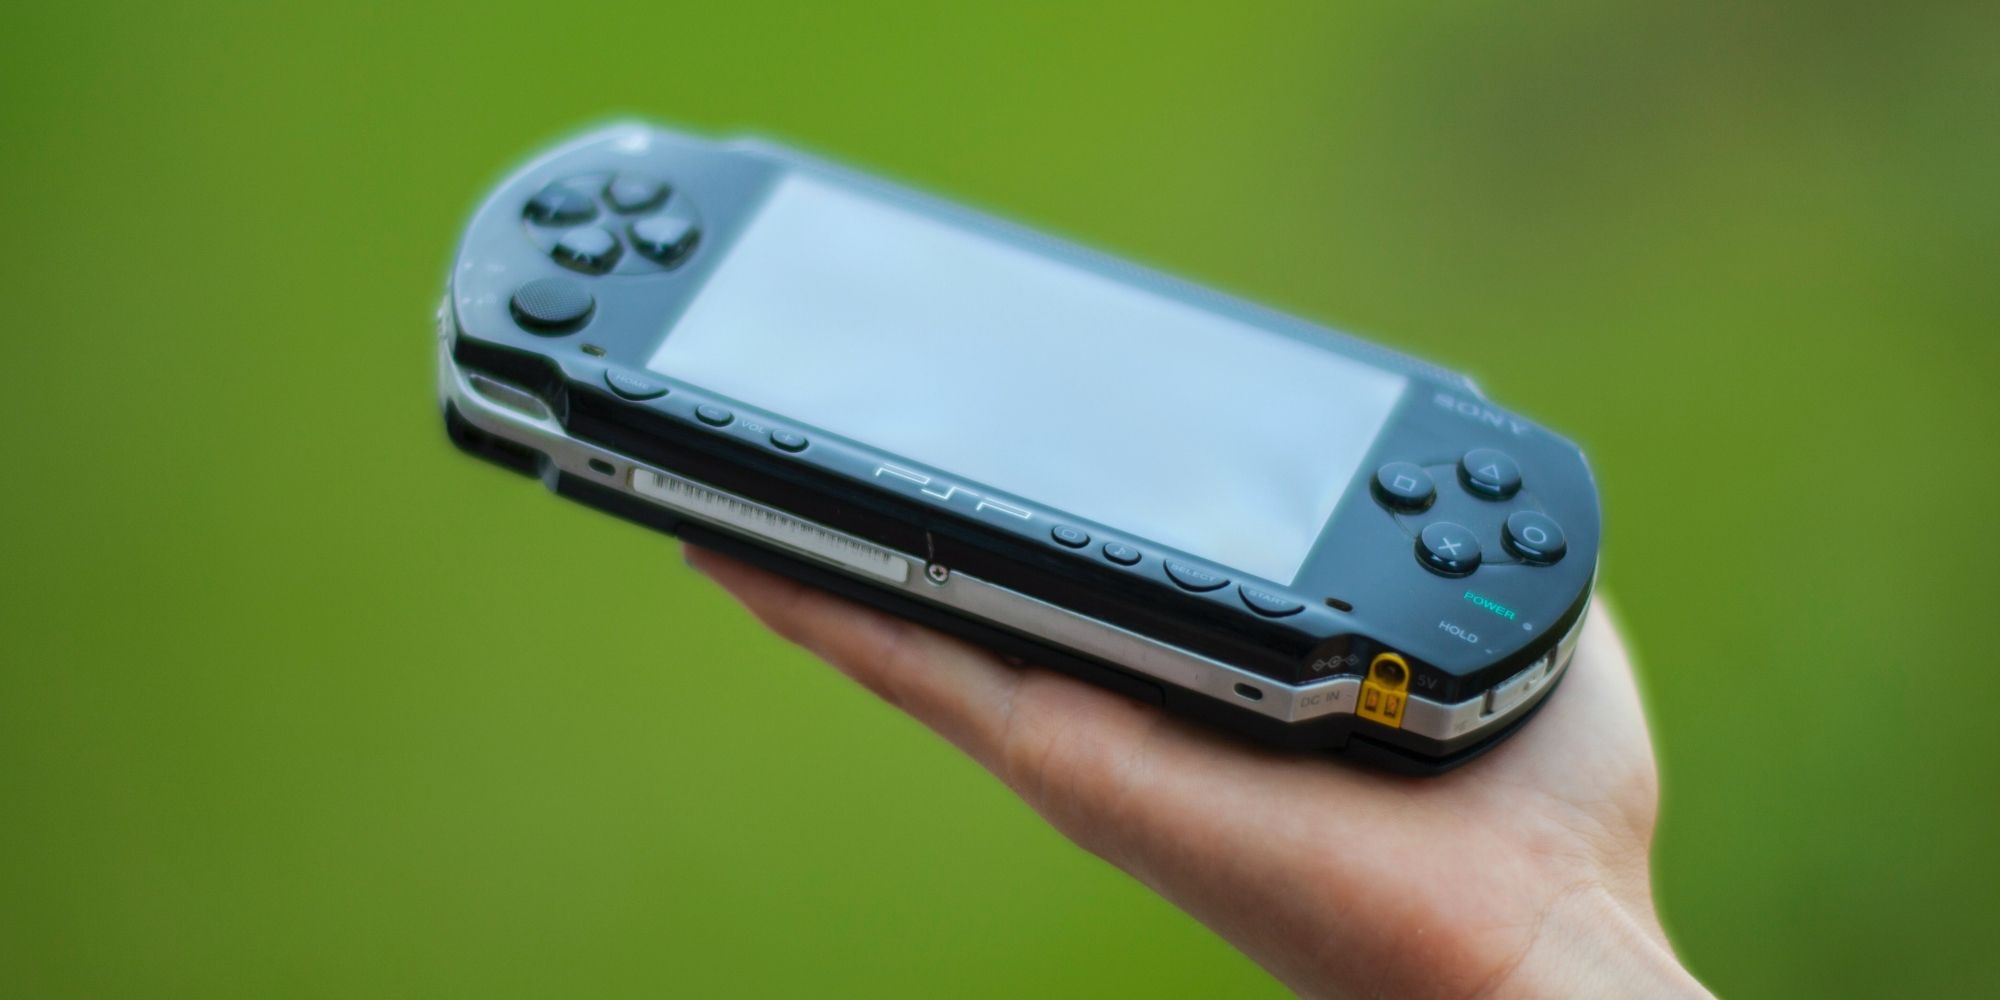 PSP game system being held up on green background